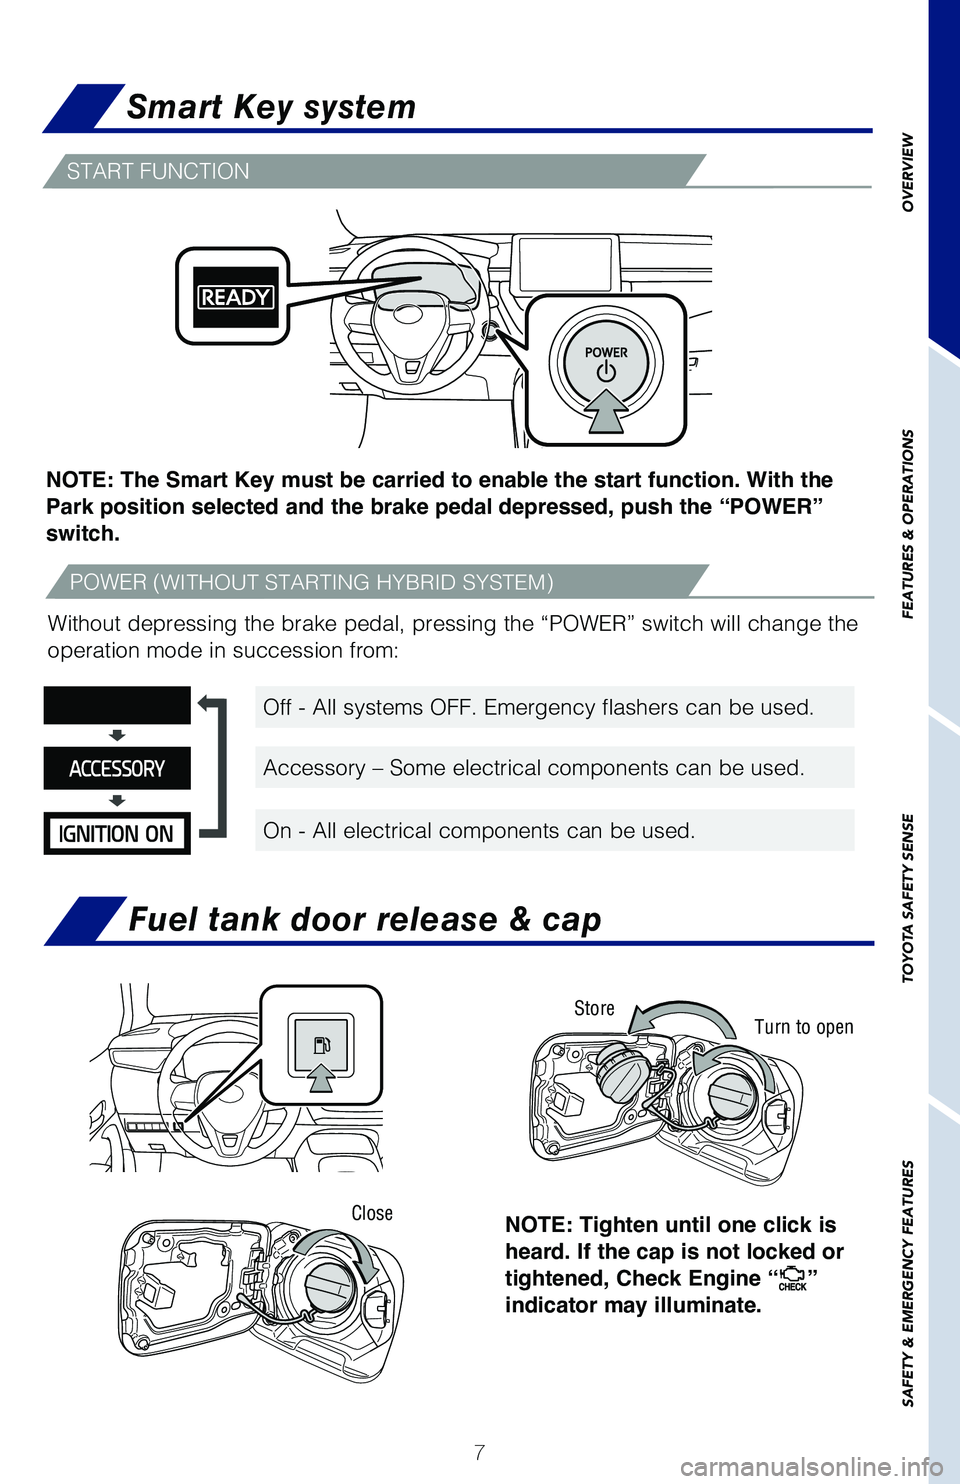 TOYOTA COROLLA HYBRID 2020  Owners Manual (in English) 7
OVERVIEW
FEATURES & OPERATIONS
TOYOTA SAFETY SENSE
SAFETY & EMERGENCY FEATURES
Smart Key system
START FUNCTION
POWER (WITHOUT STARTING HYBRID SYSTEM)
NOTE: The Smart Key must be carried to enable th